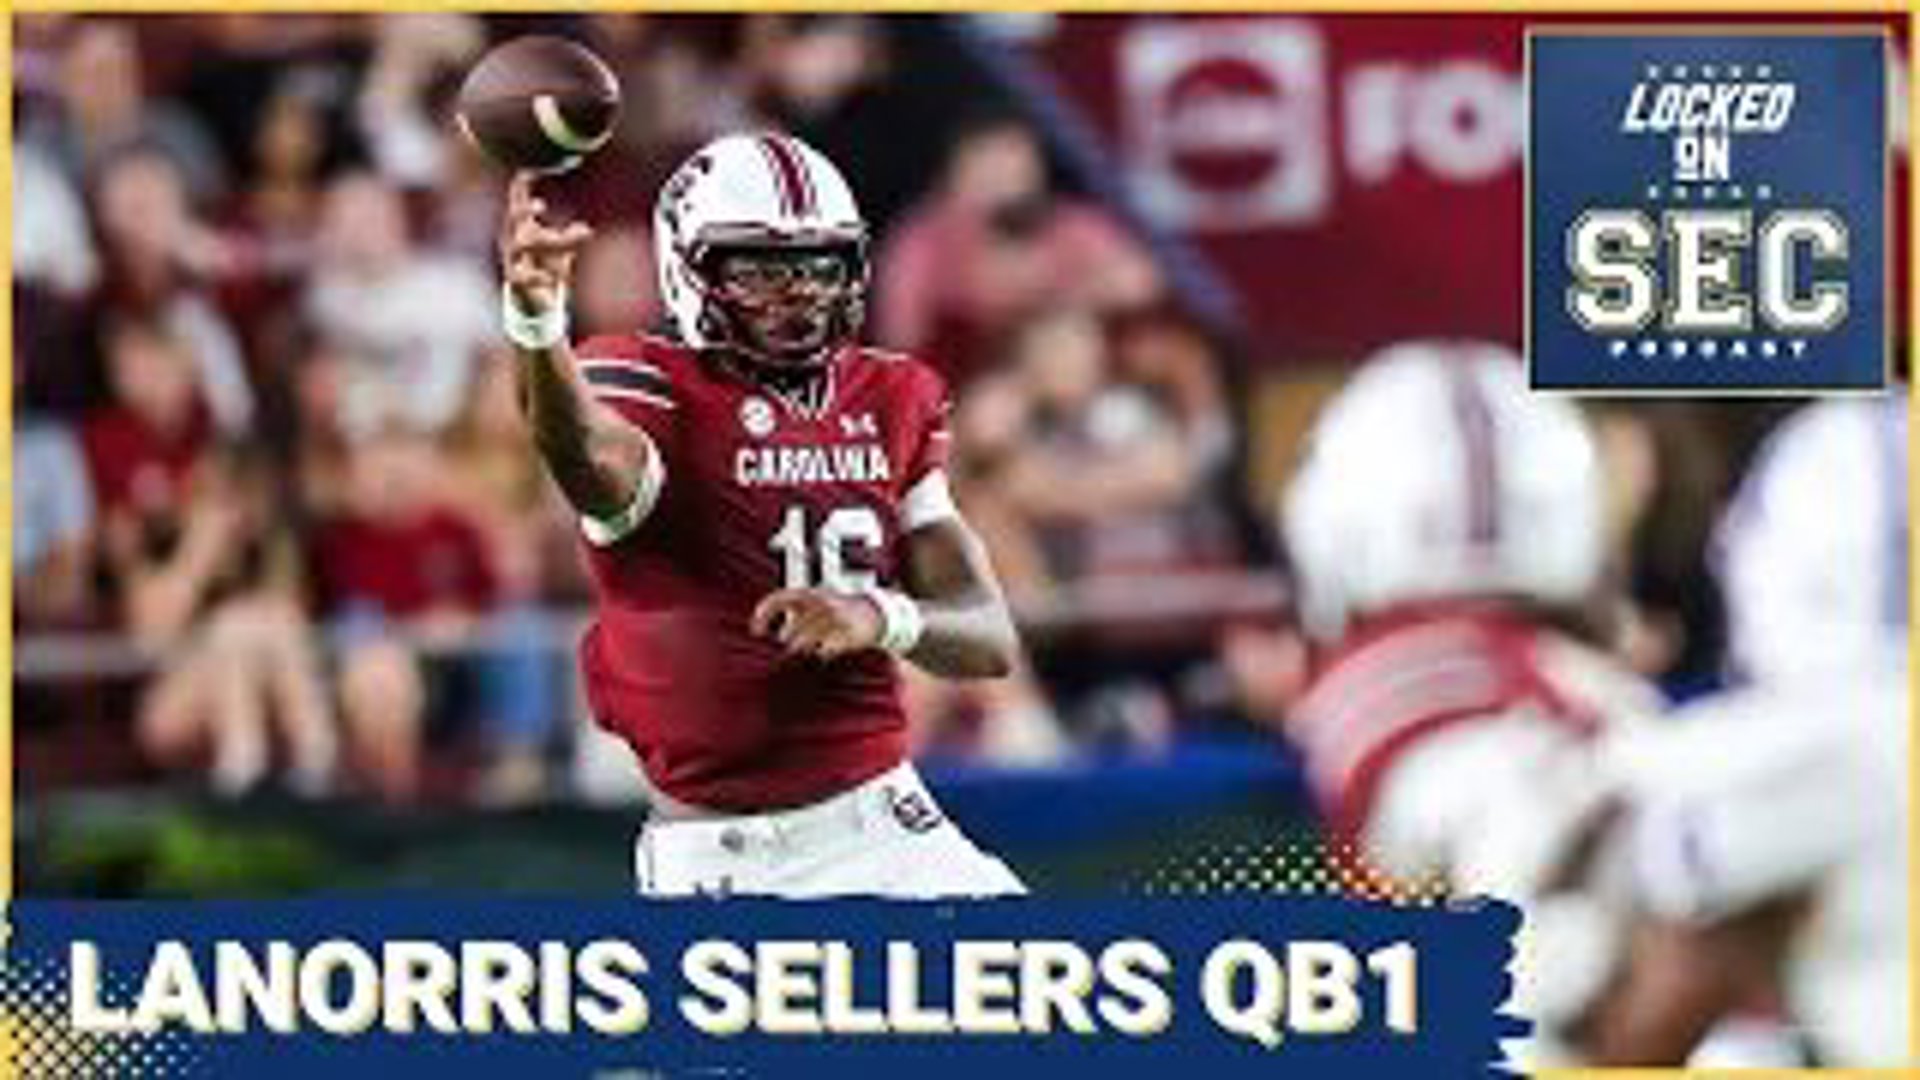 Shane Beamer announced this week that LaNorris Sellers will be their QB1 heading into fall camp. Not a big surprise, but he did opt not to name a starter this spring